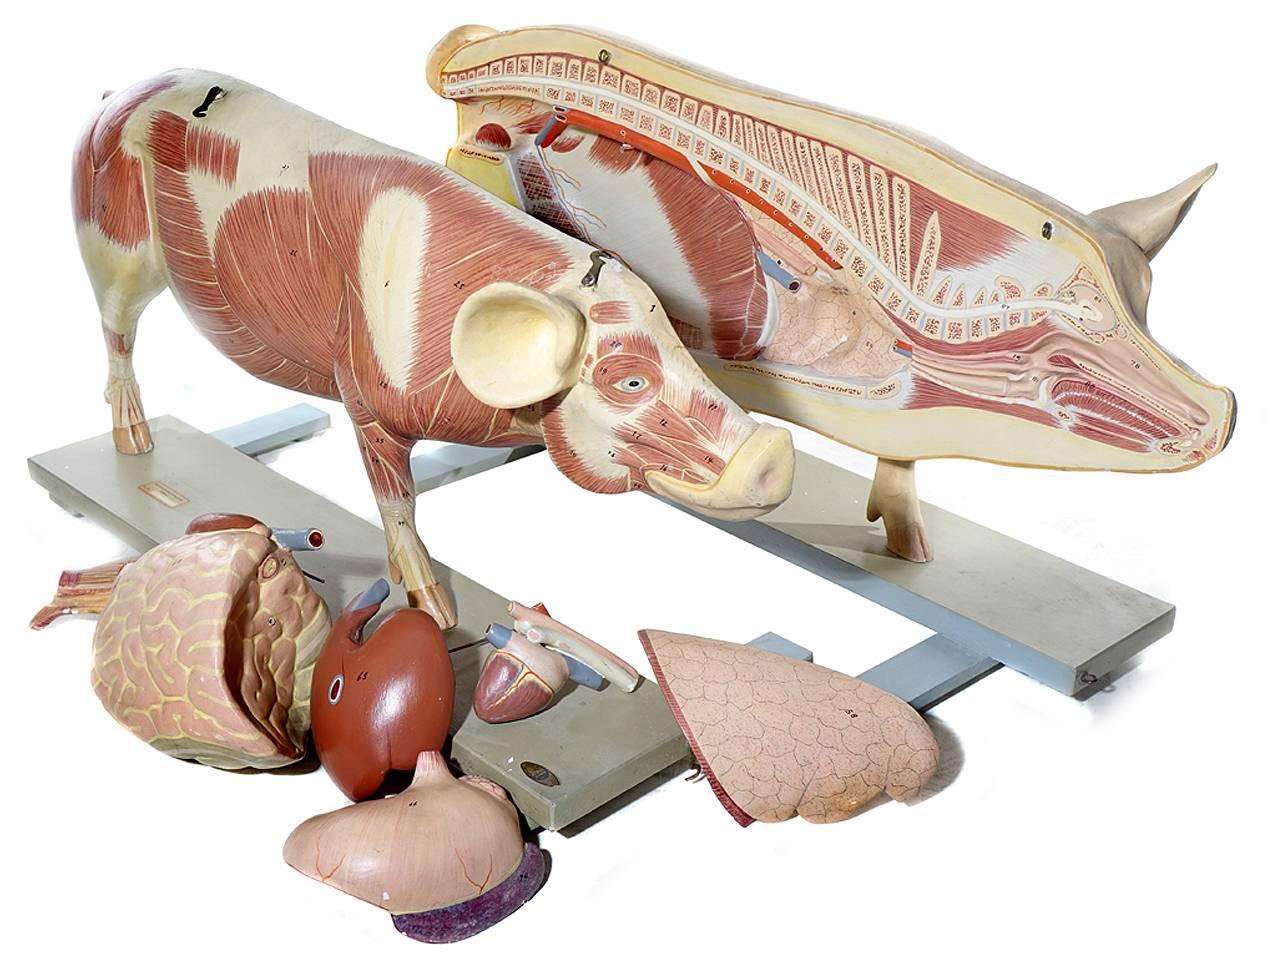 Industrial Lifesize Anatomical Model of Pig, Germany